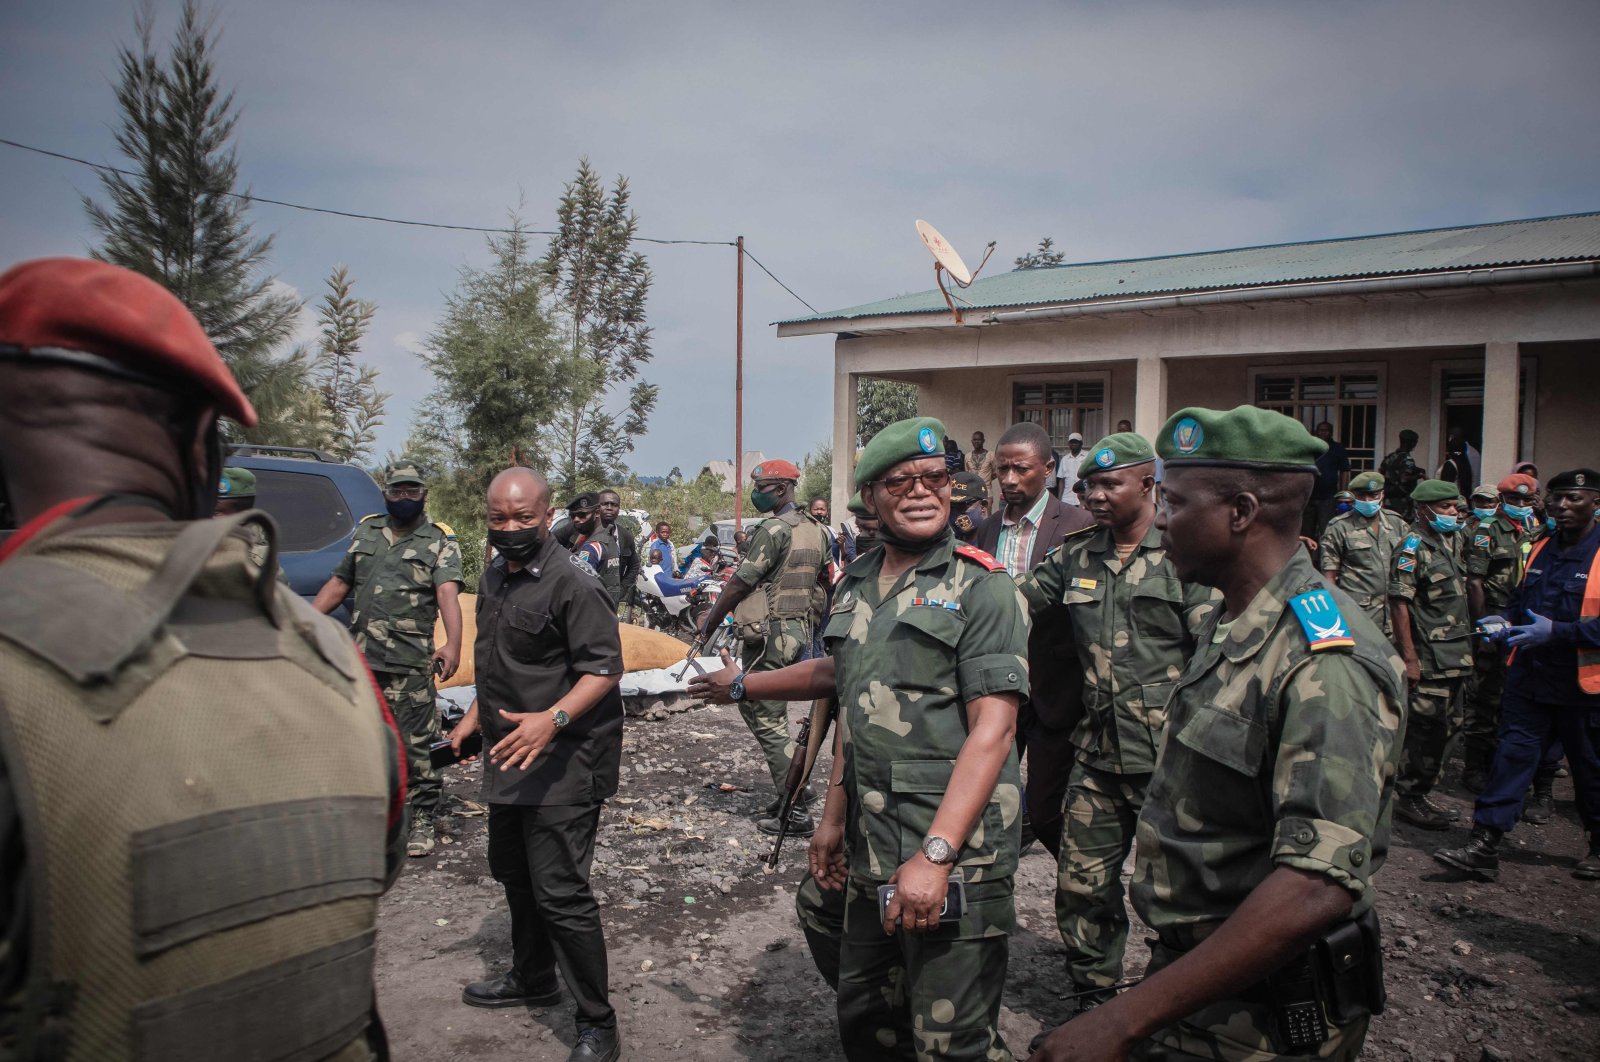 Military governor Lieutenant-General Ndima visits residents displaced by the volcanic eruption of Mount Nyiragongo to distribute government aid in Sake, near Goma, Democratic Republic of Congo, May 29, 2021. (AFP Photo)